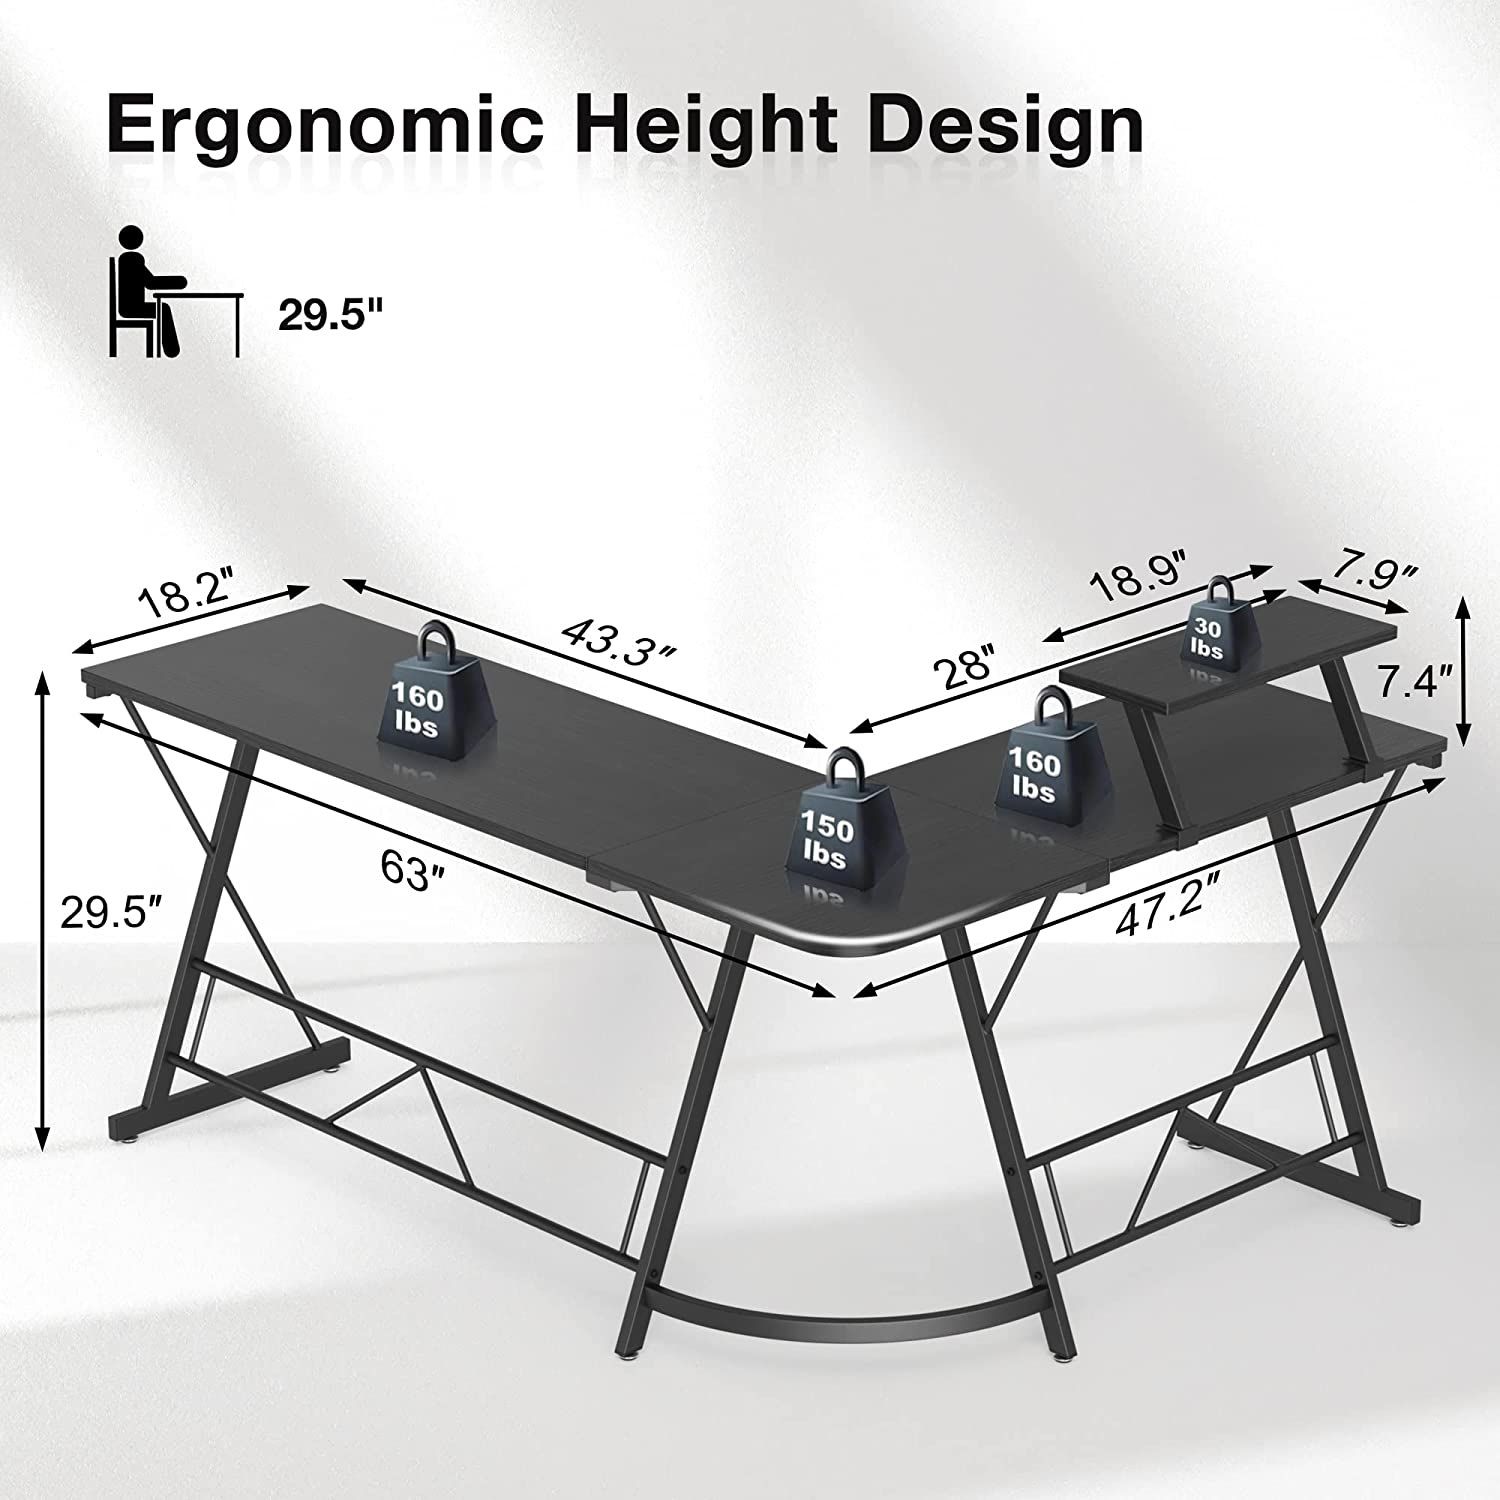 the dimensions of the 63-inch mr ironstone l-shaped gaming desk